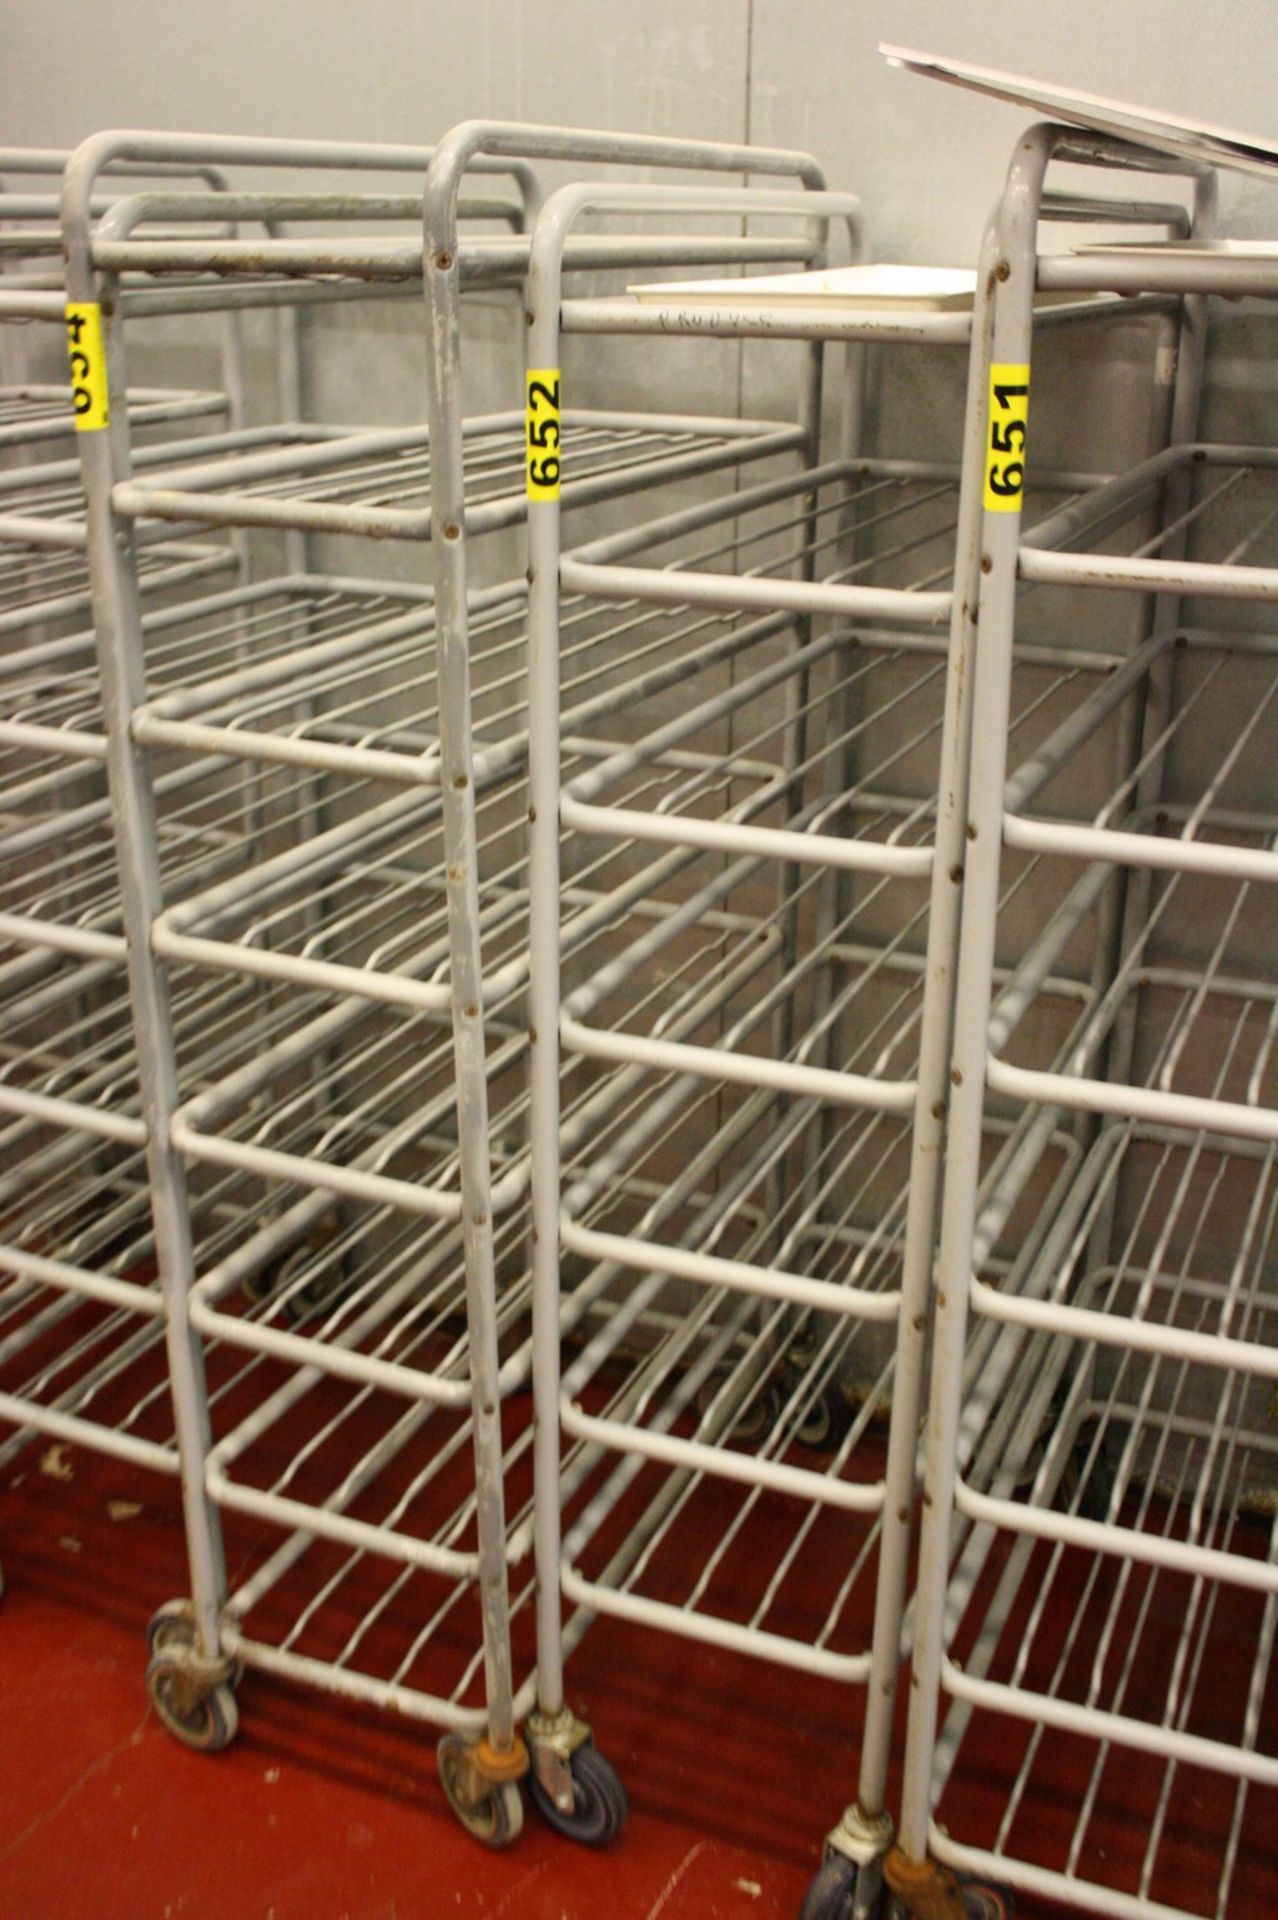 PORTABLE MEAT RACK-APPROX. 63" X 33" X 15"